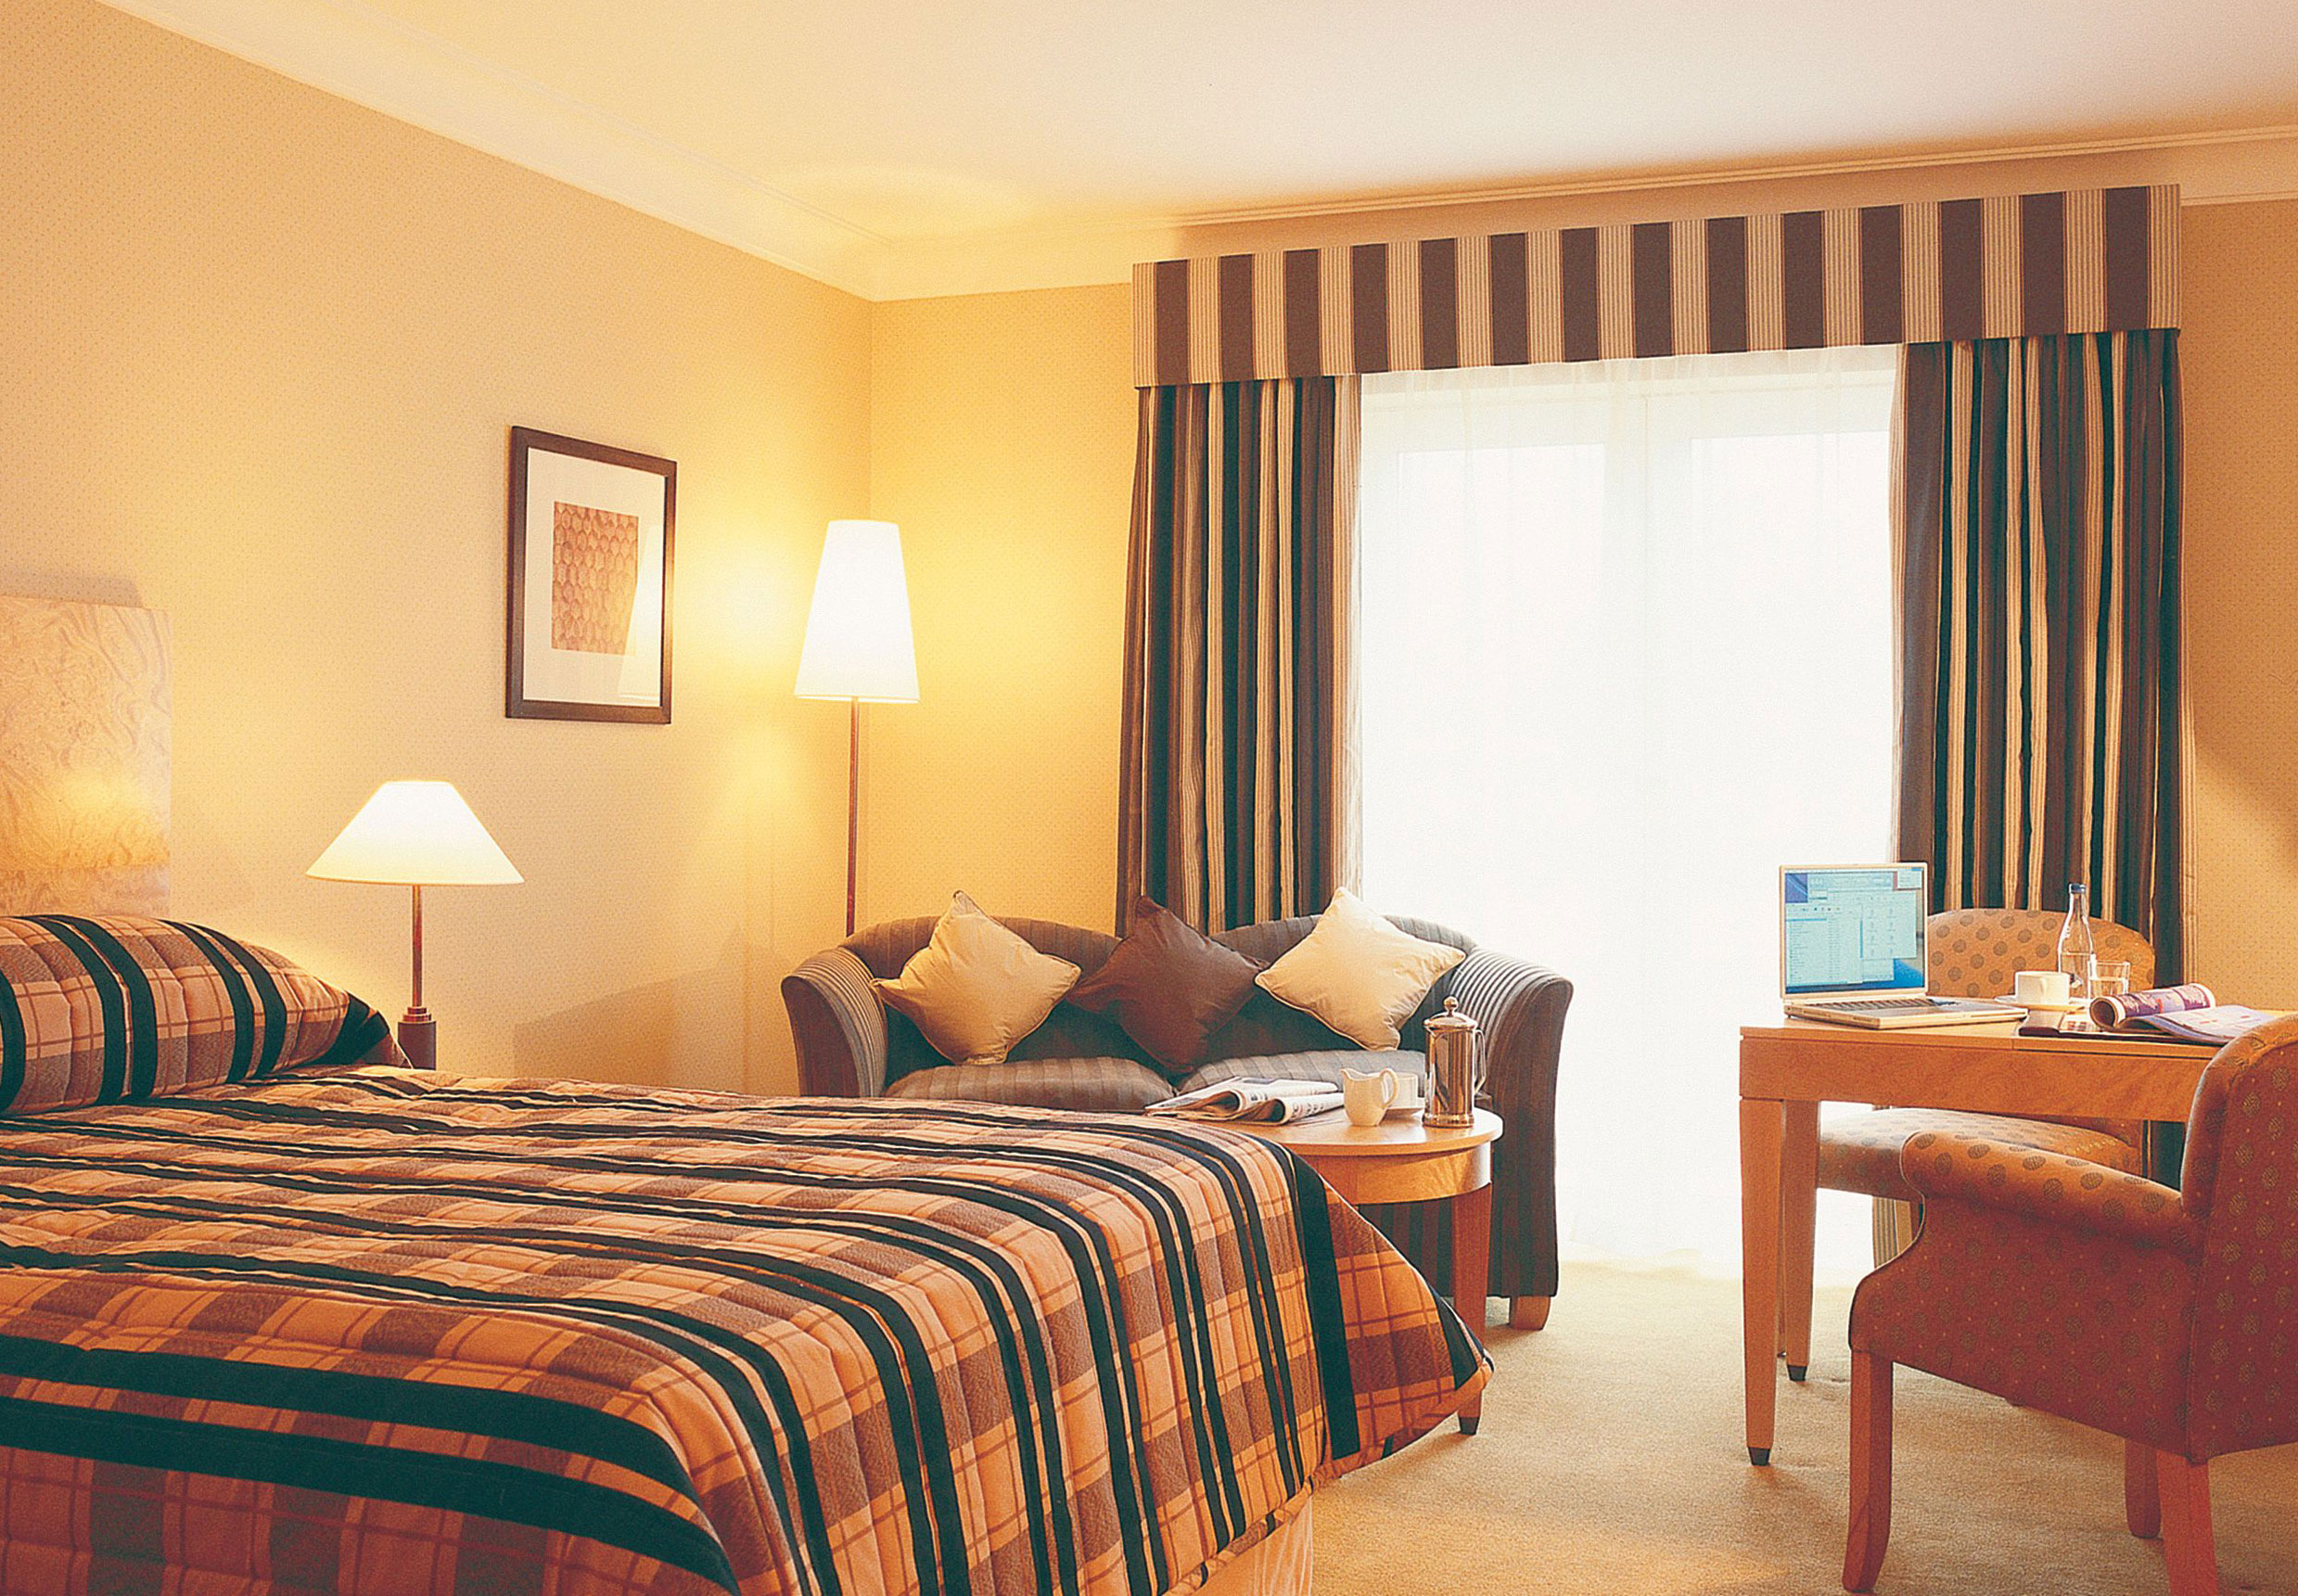 One Night Stay for Two at The Regency Park Hotel